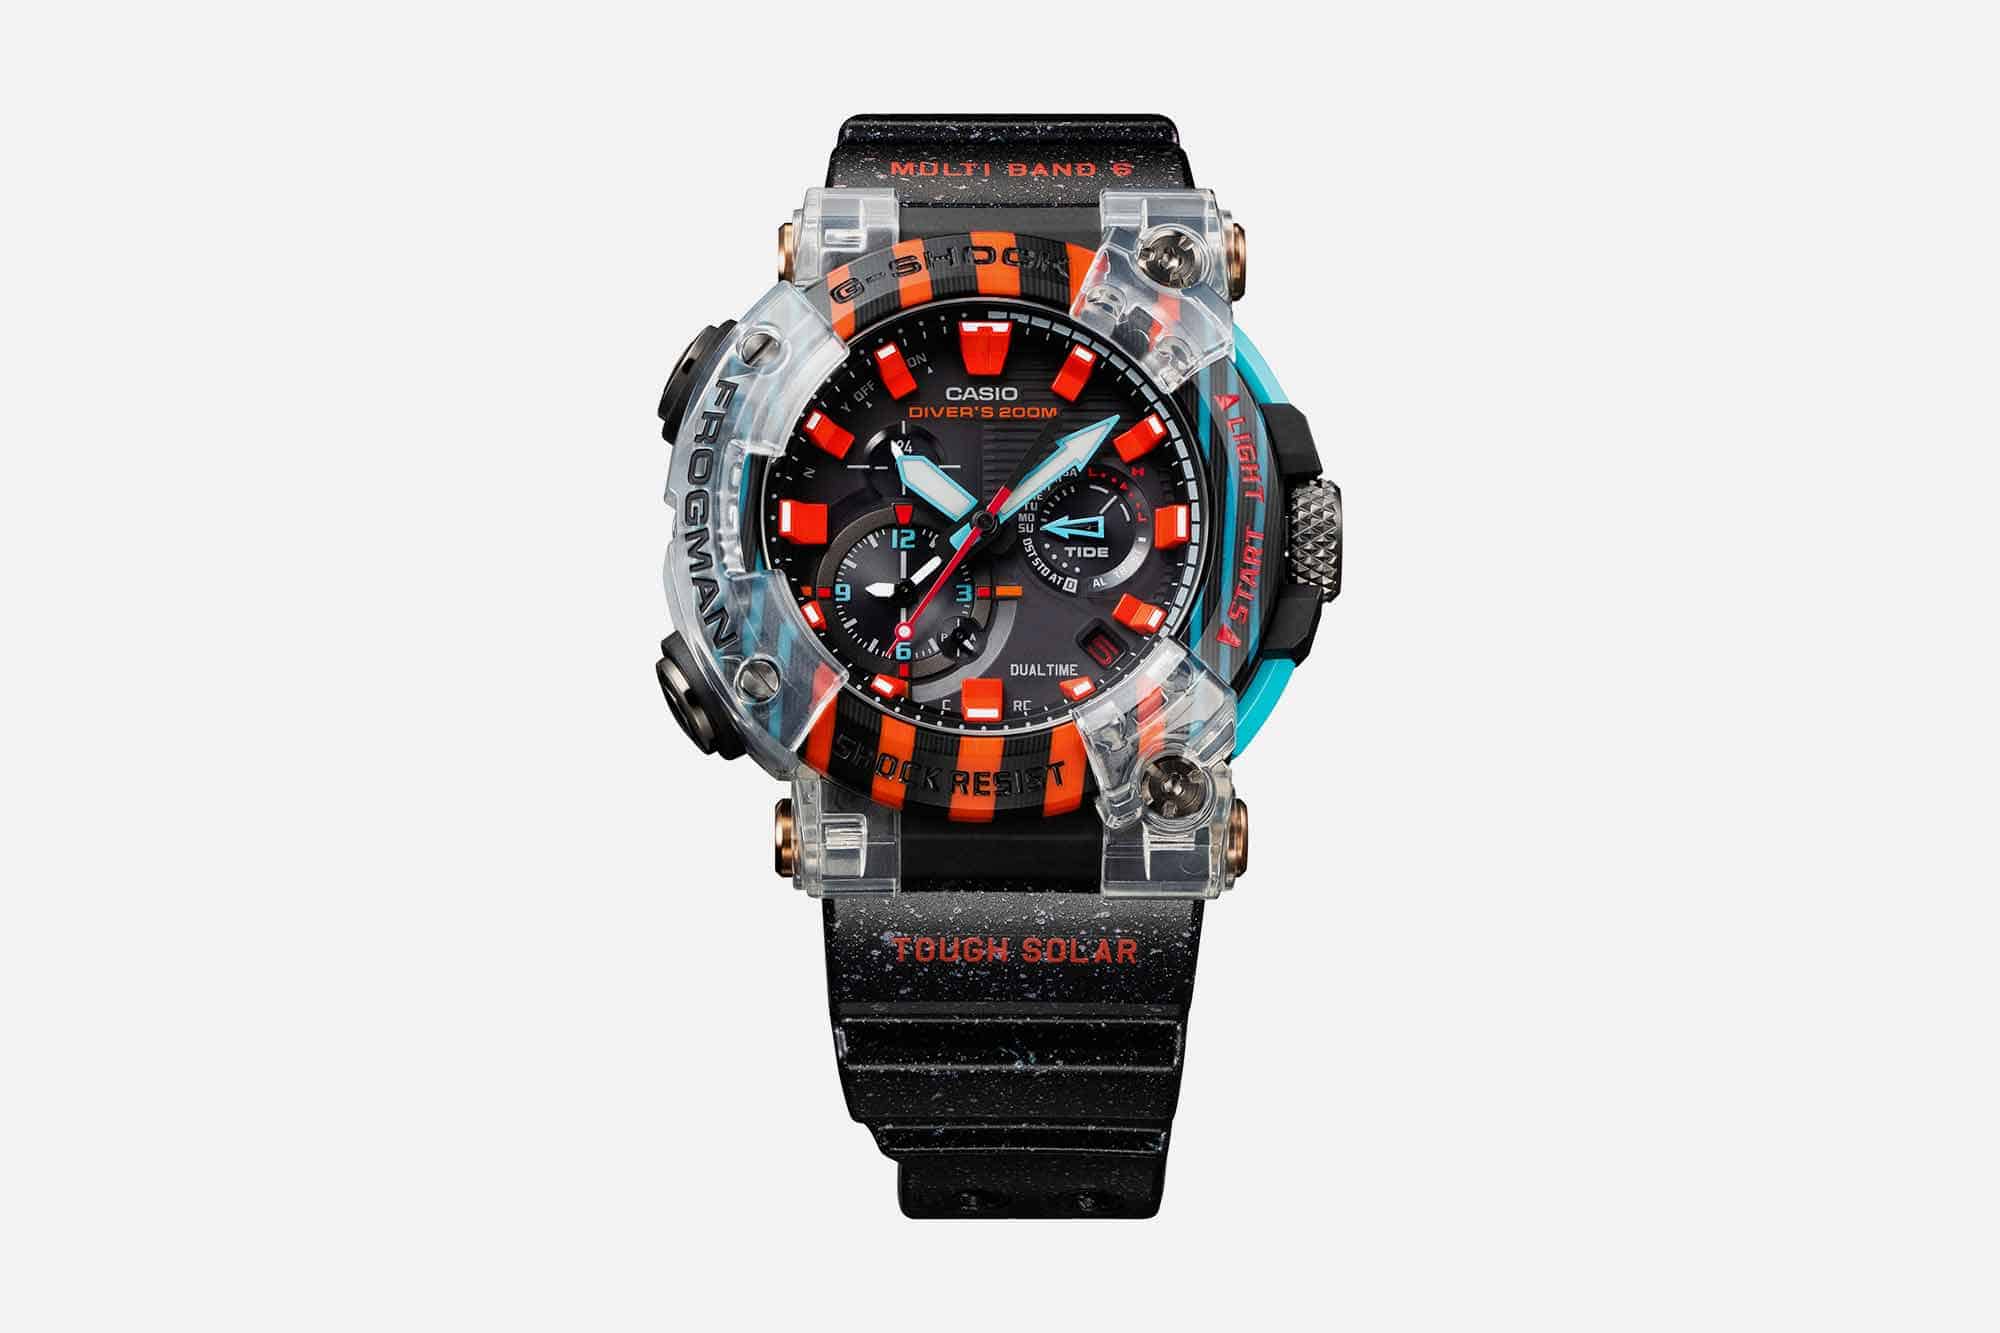 G-SHOCK Celebrates the 30th Anniversary of the Frogman with a Limited Edition Inspired by a Colorful (but Poisonous) Frog